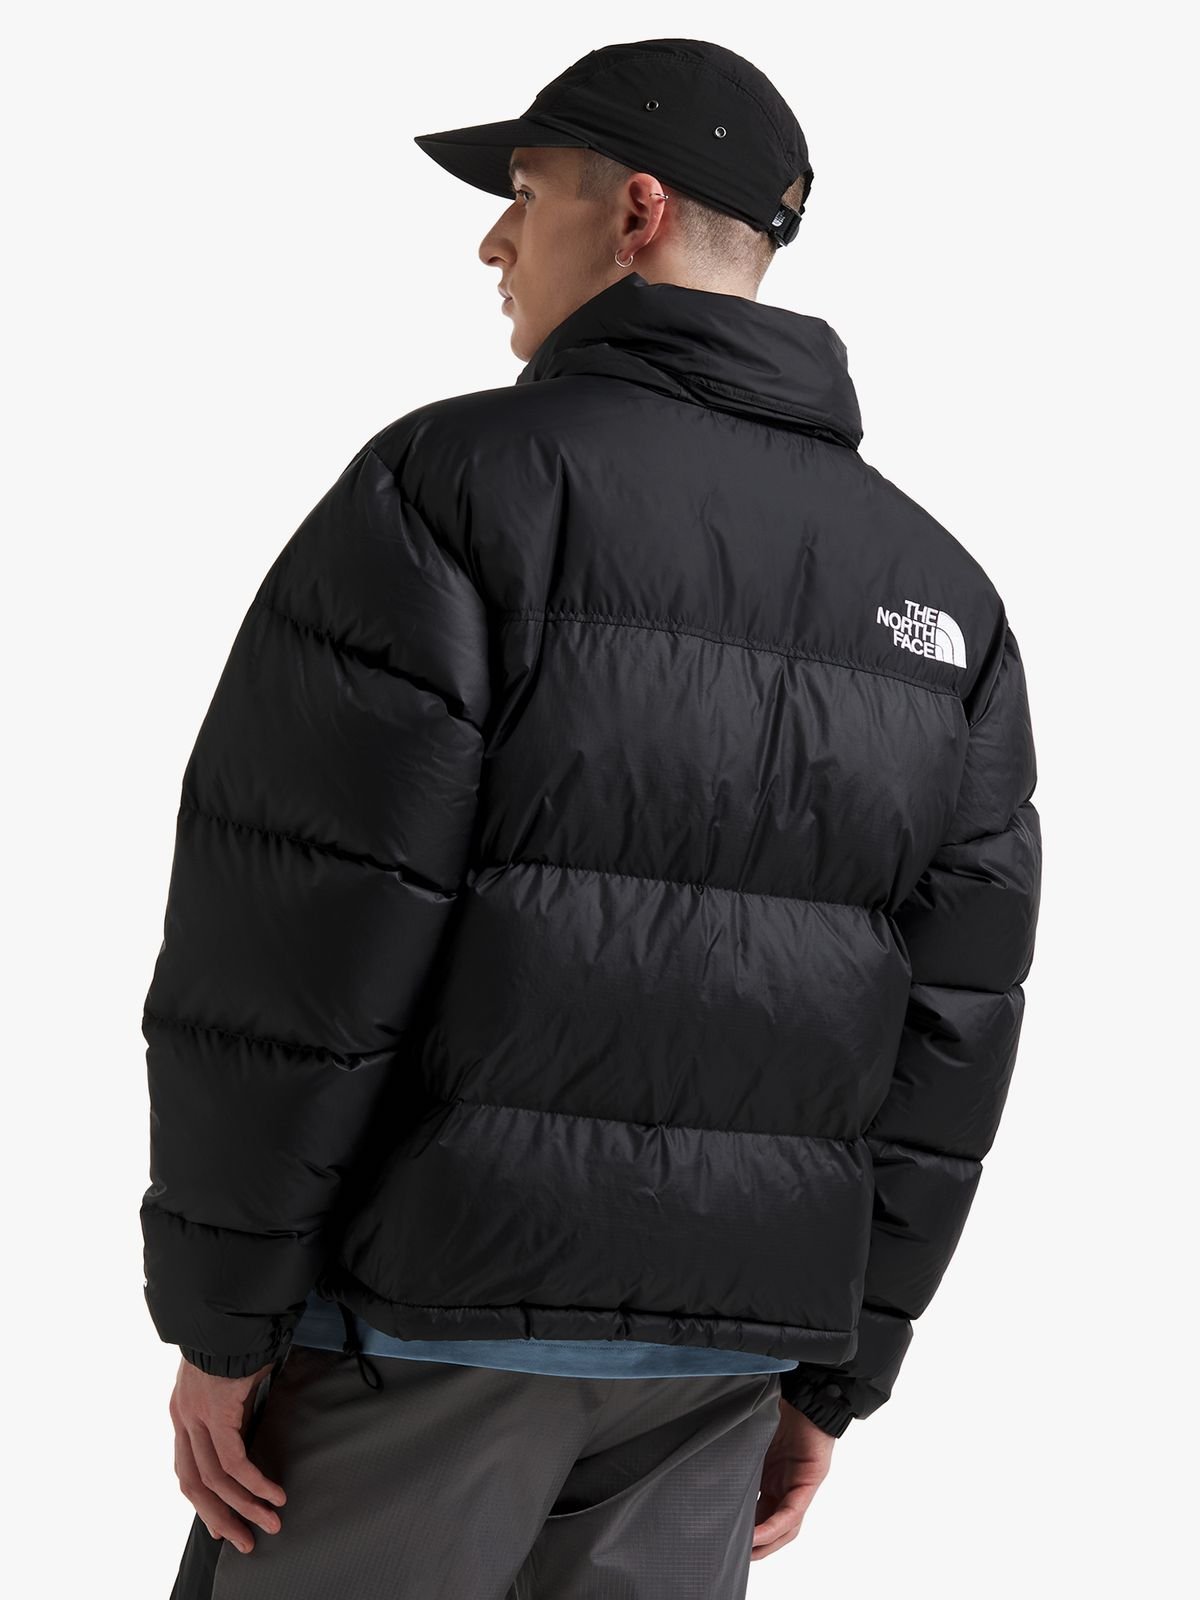 The North Face Men's 1996 Nuptse Black Jacket
The North Face